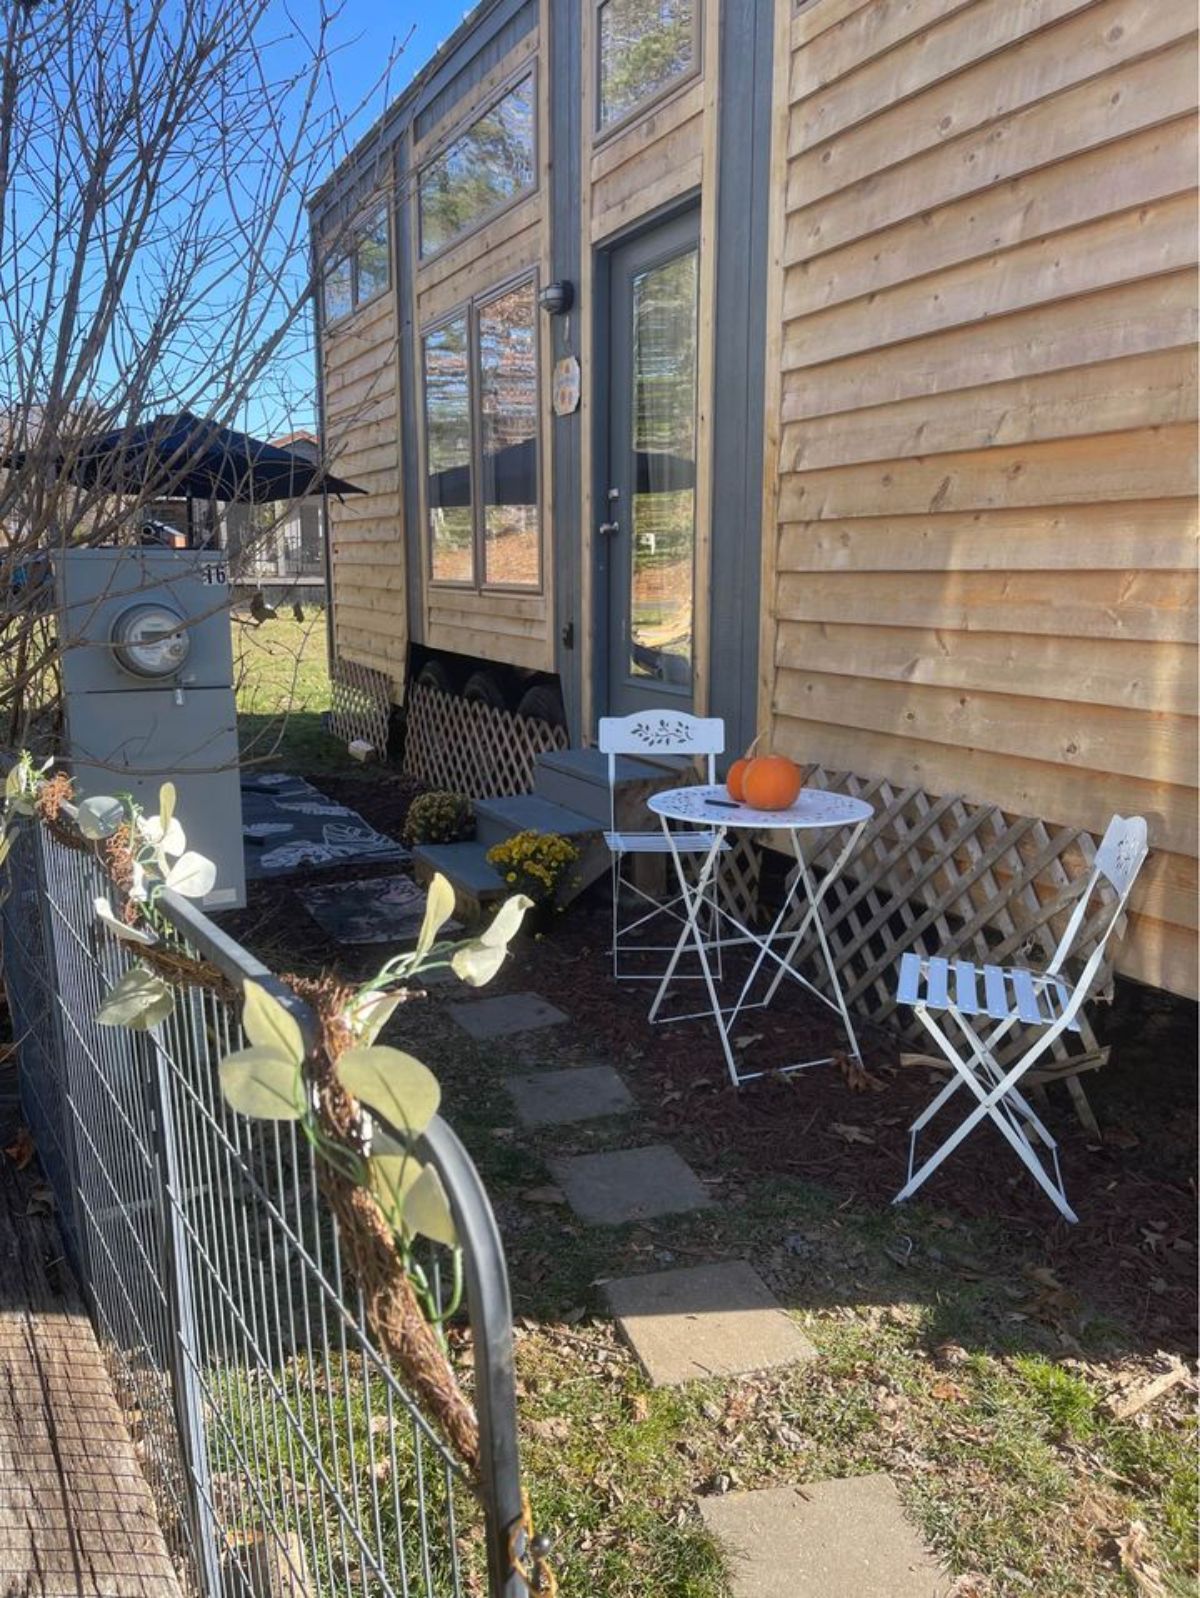 Beautiful table and chair setup outside the main door of 2 Bedroom Tiny Home